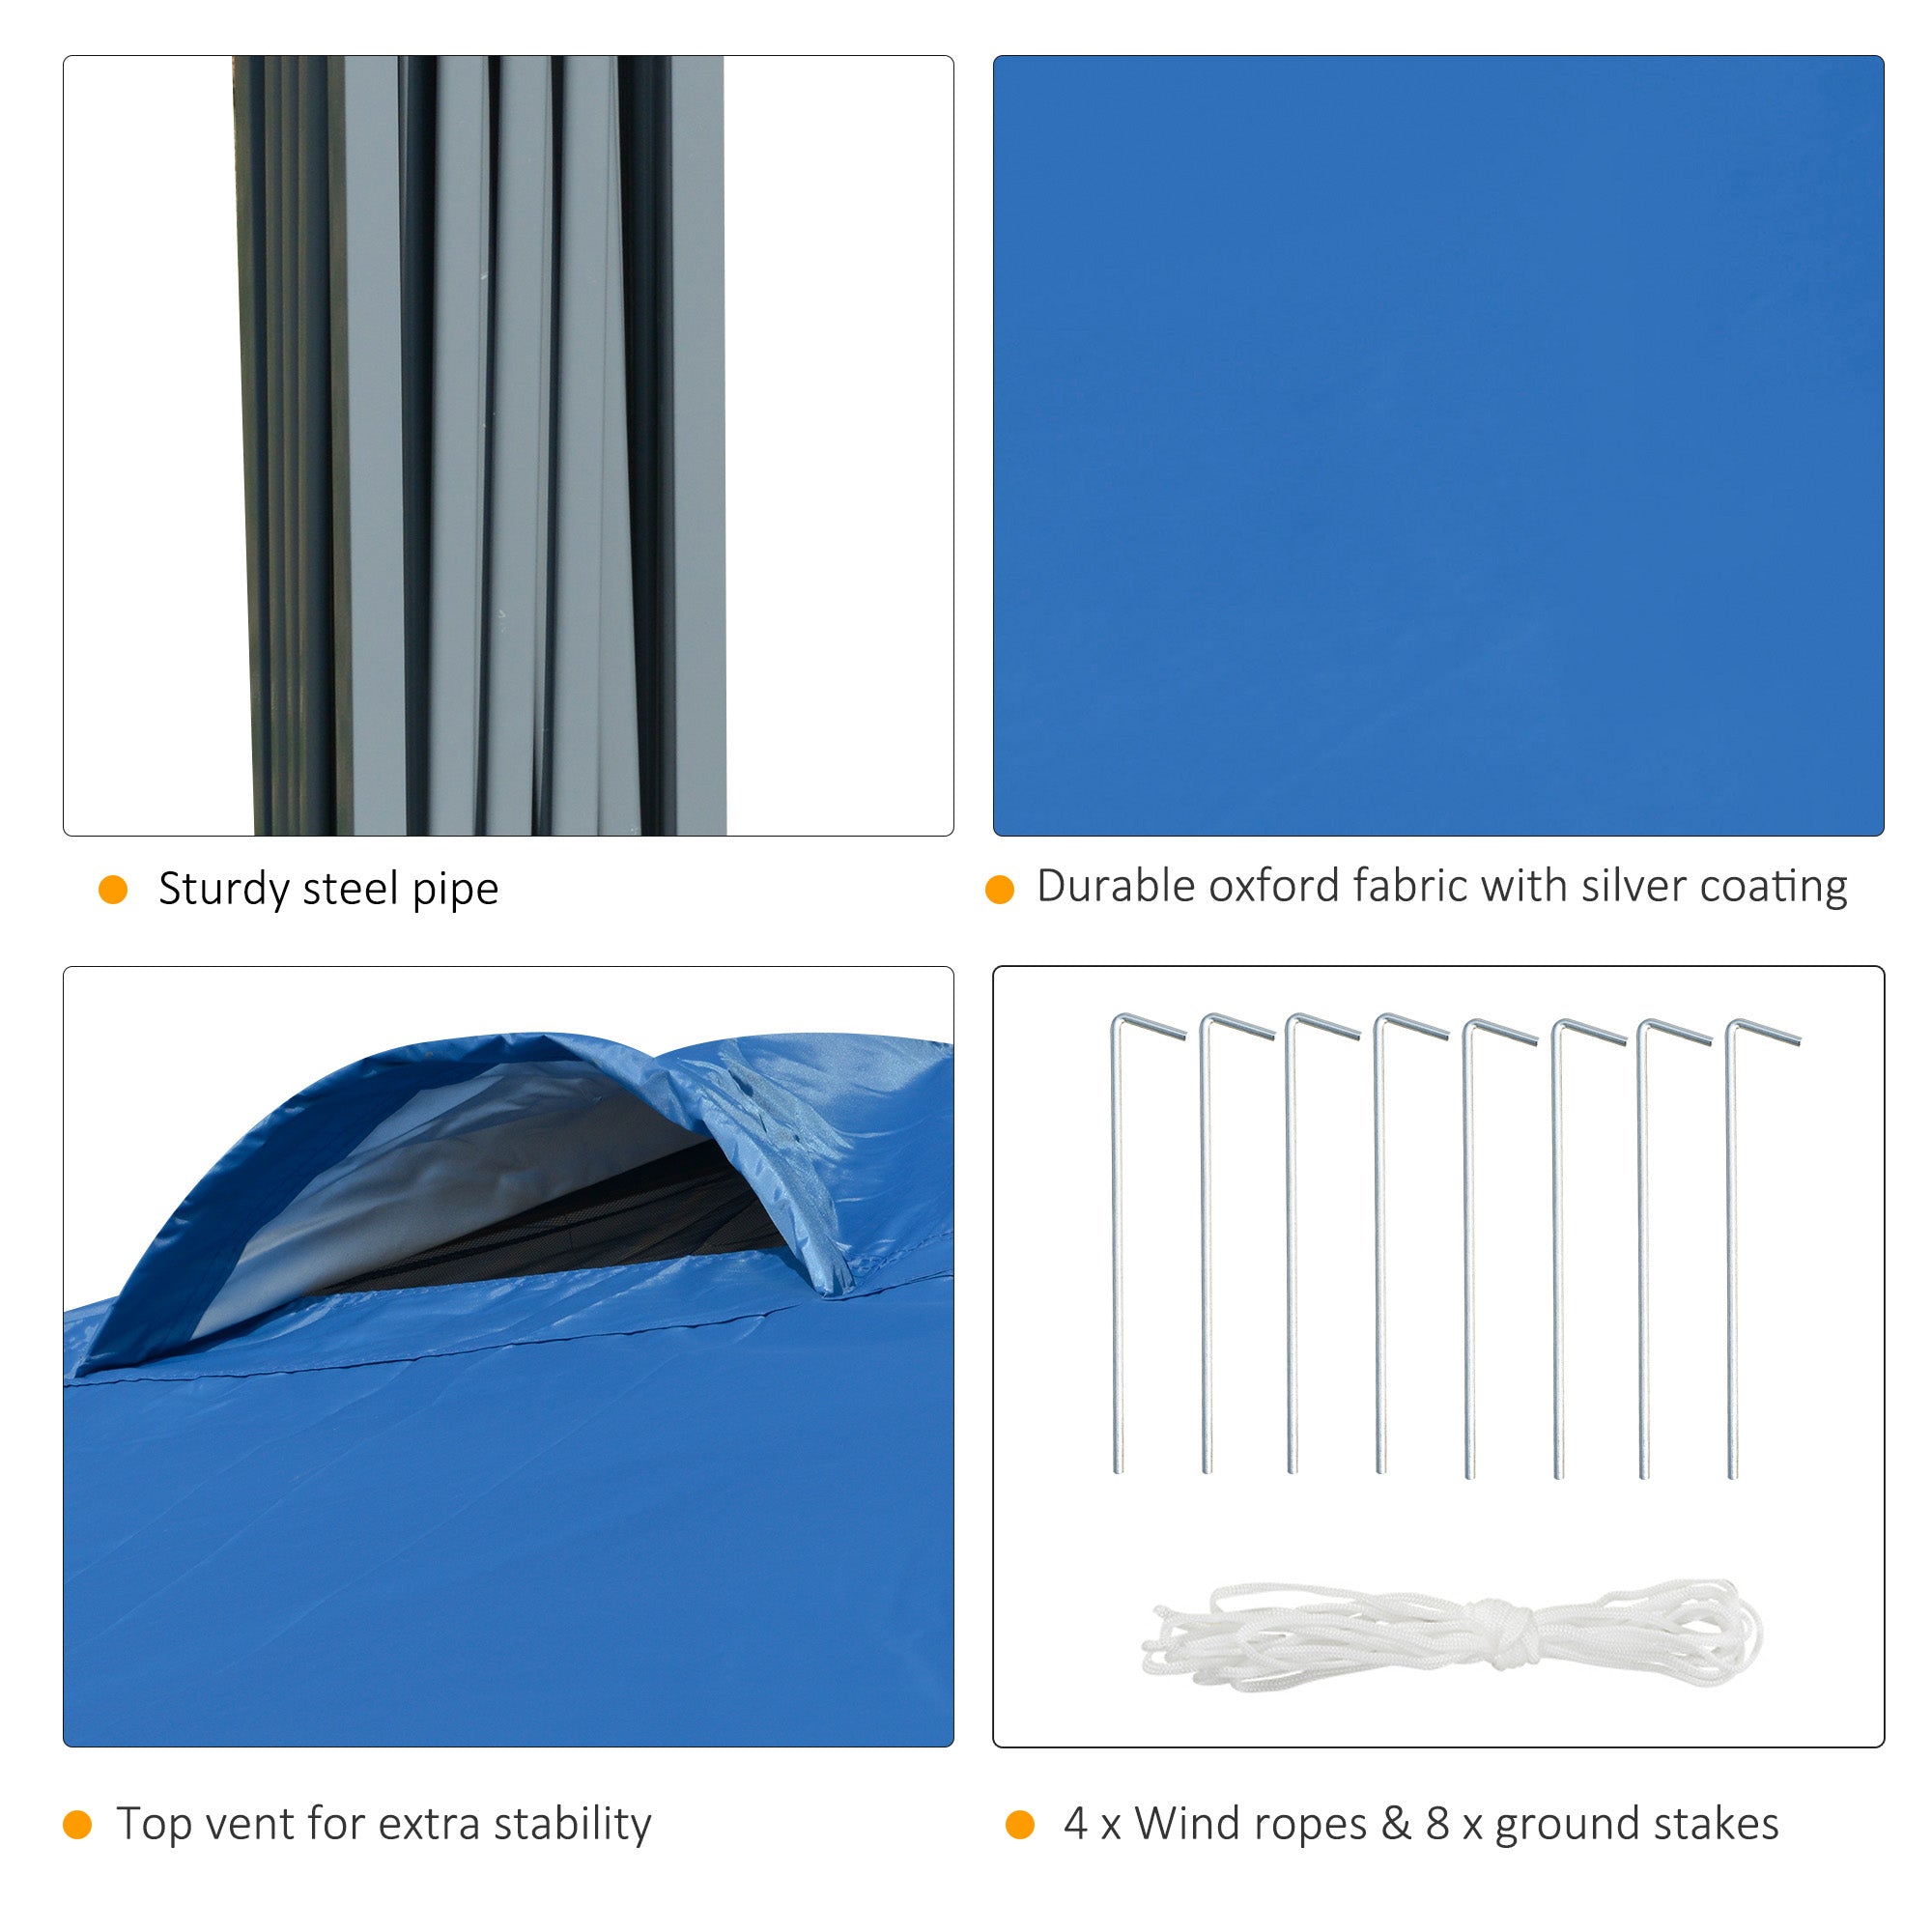 Outsunny 10' x 10' Outdoor Pop-Up Party Tent Canopy with Airy Top Vent, Blue